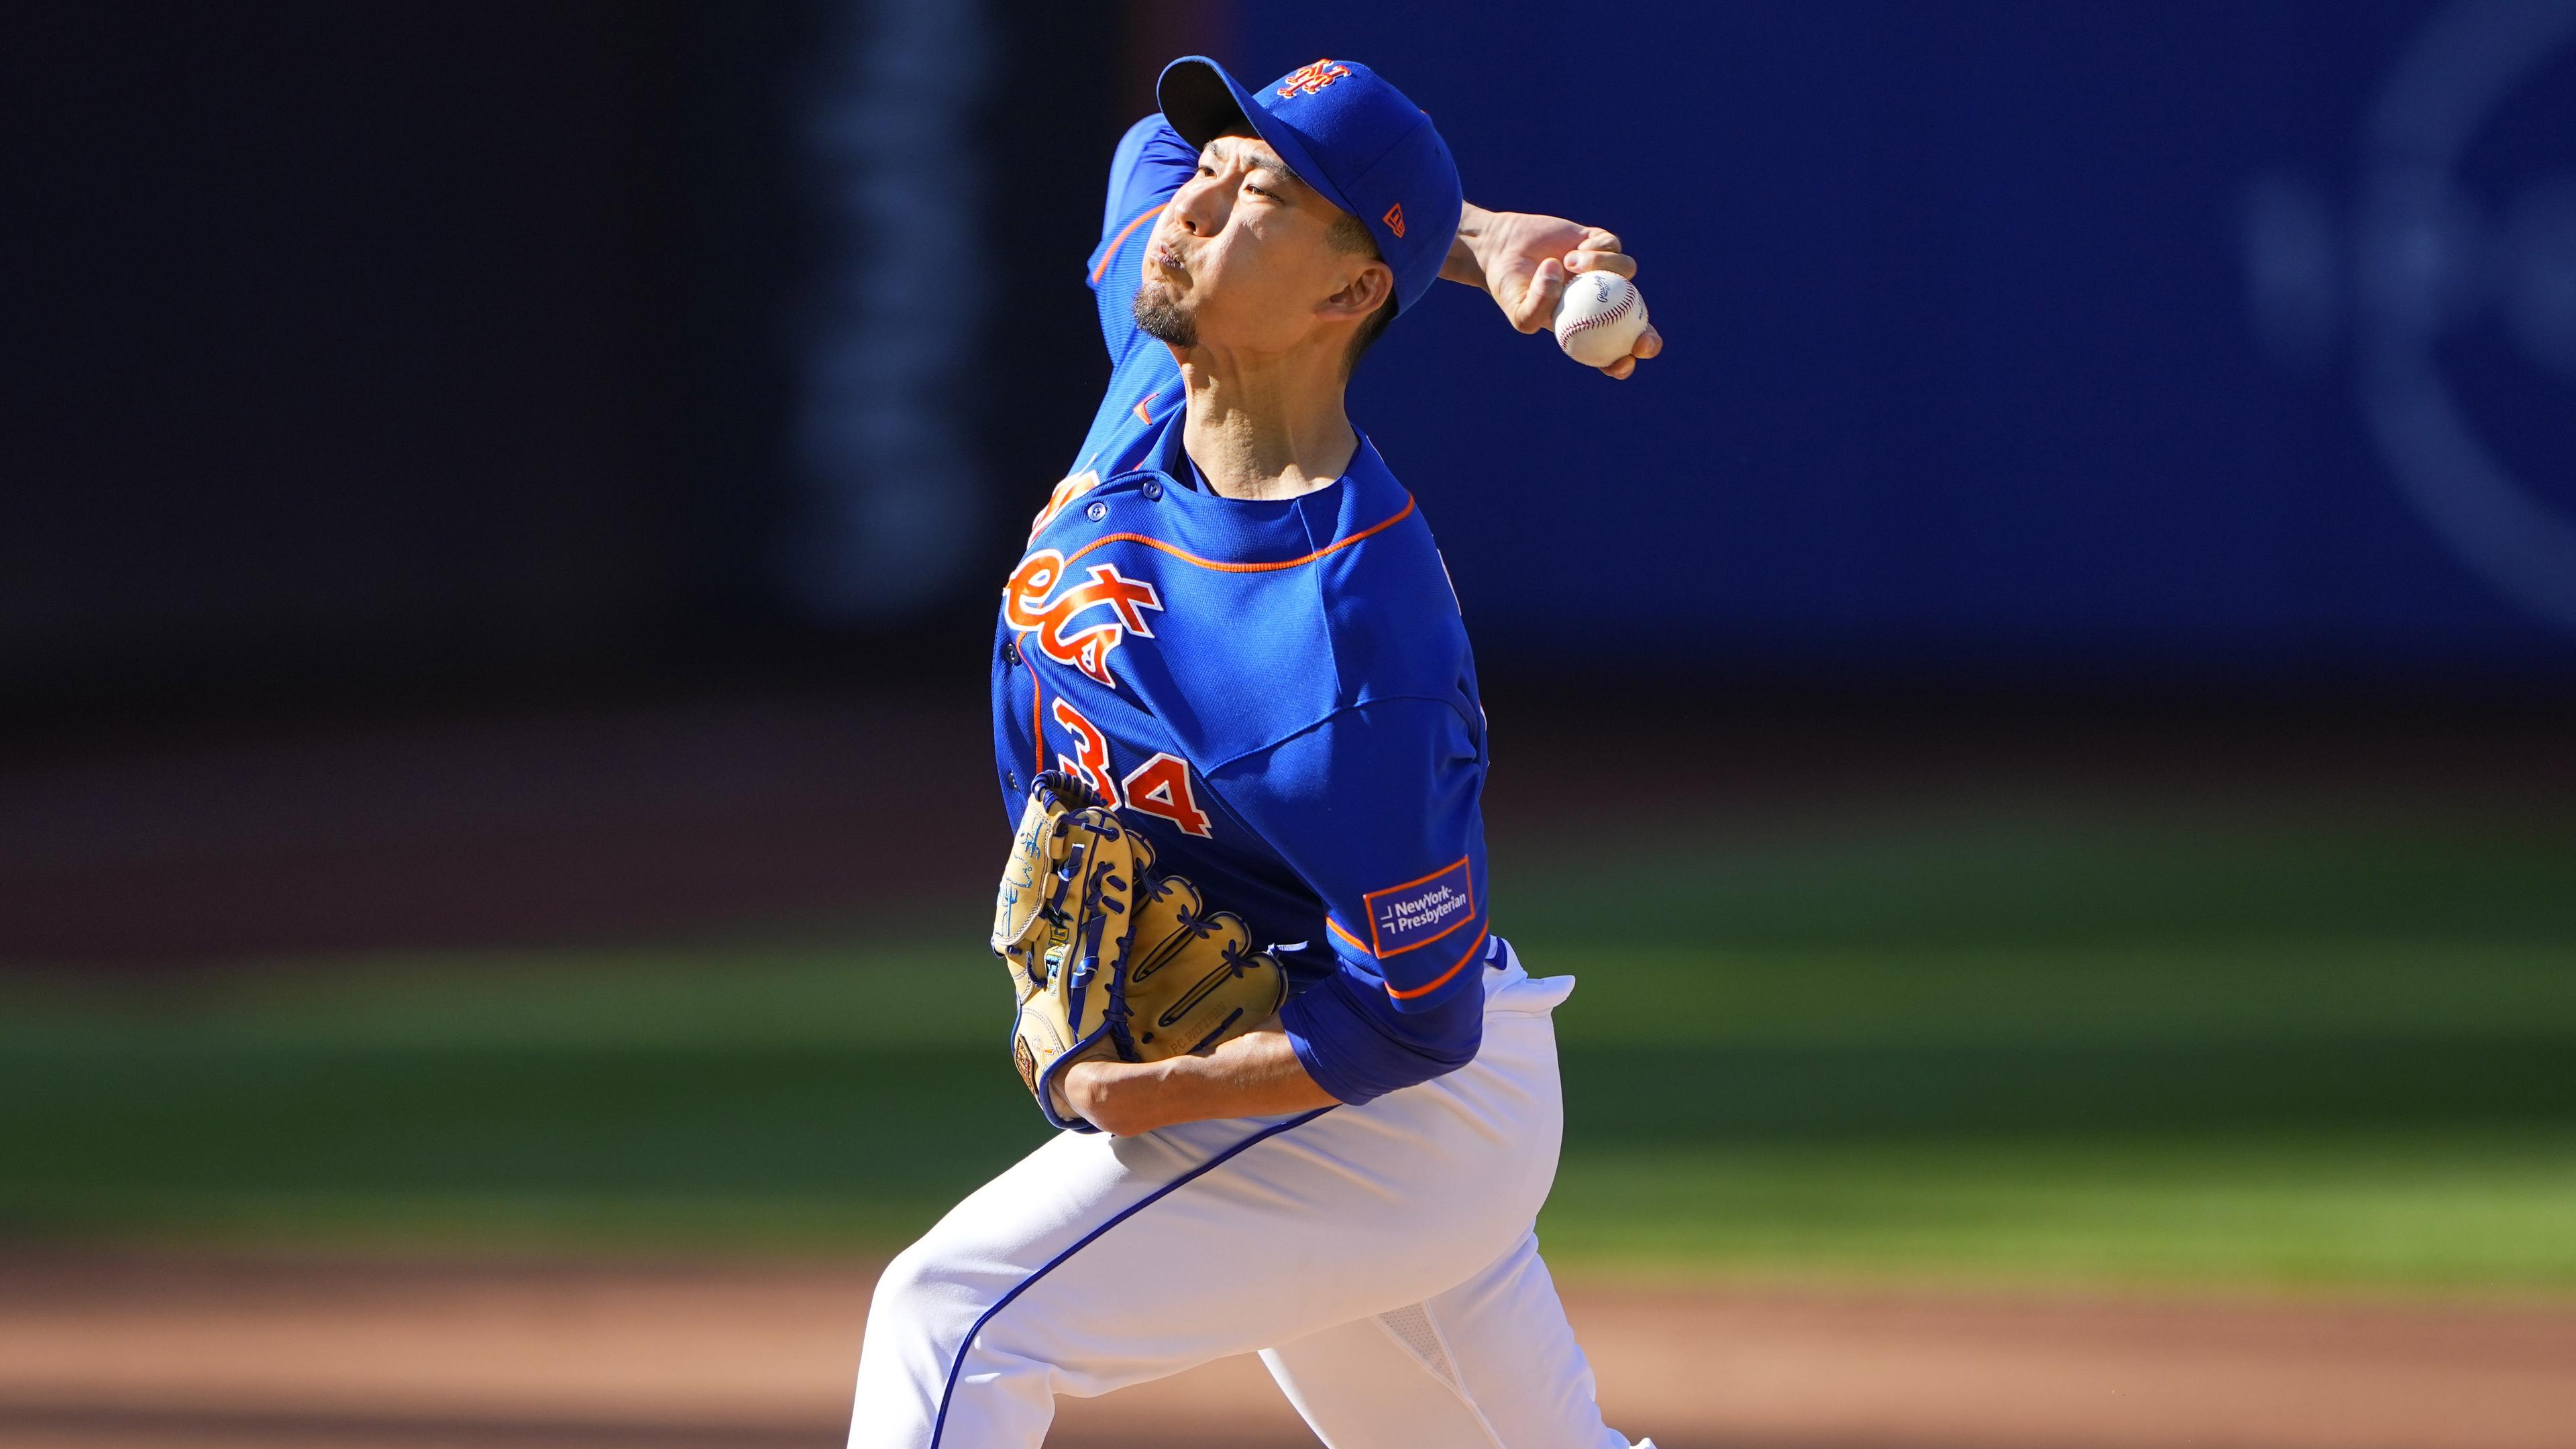 New York Mets pitcher Kodai Senga (34) delivers a pitch against the Arizona Diamondbacks during the first inning at Citi Field / Gregory Fisher - USA TODAY Sports